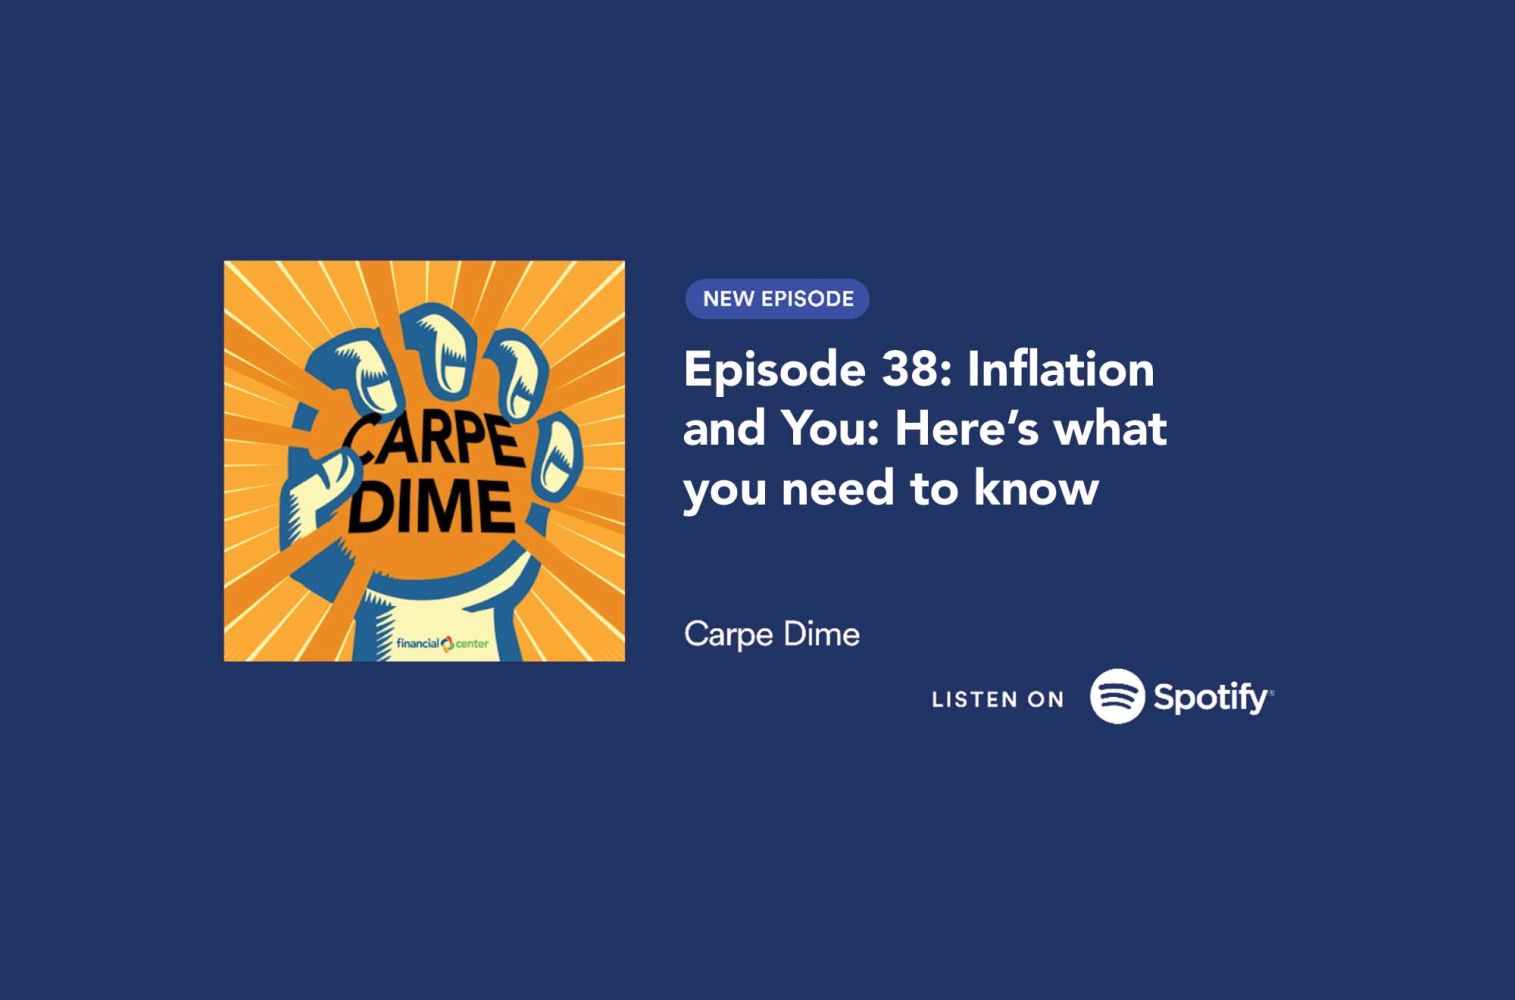 Carpe Dime - Episode 38 - Inflation and You: Here's what you need to know